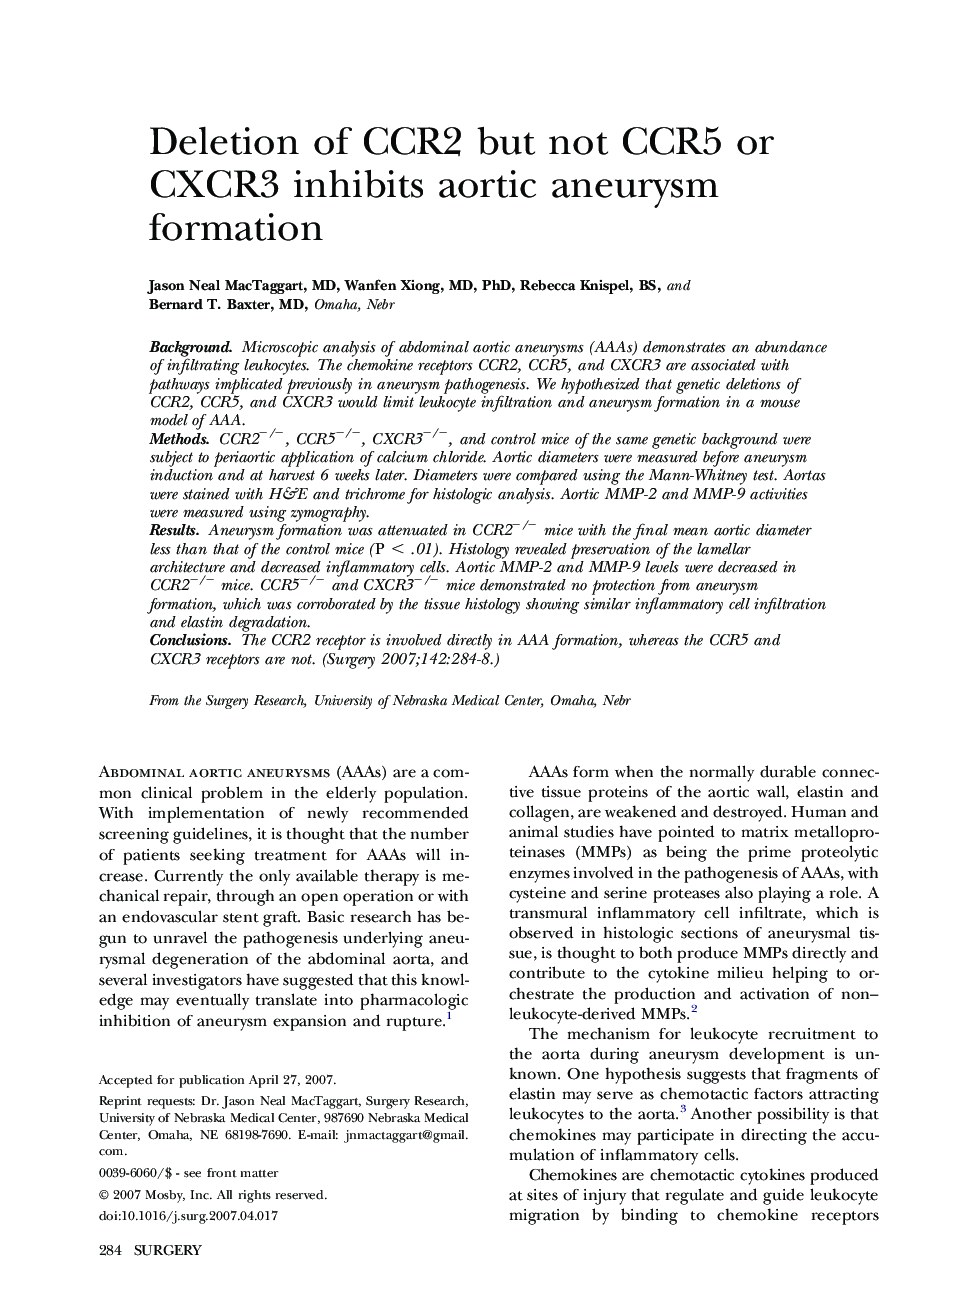 Deletion of CCR2 but not CCR5 or CXCR3 inhibits aortic aneurysm formation